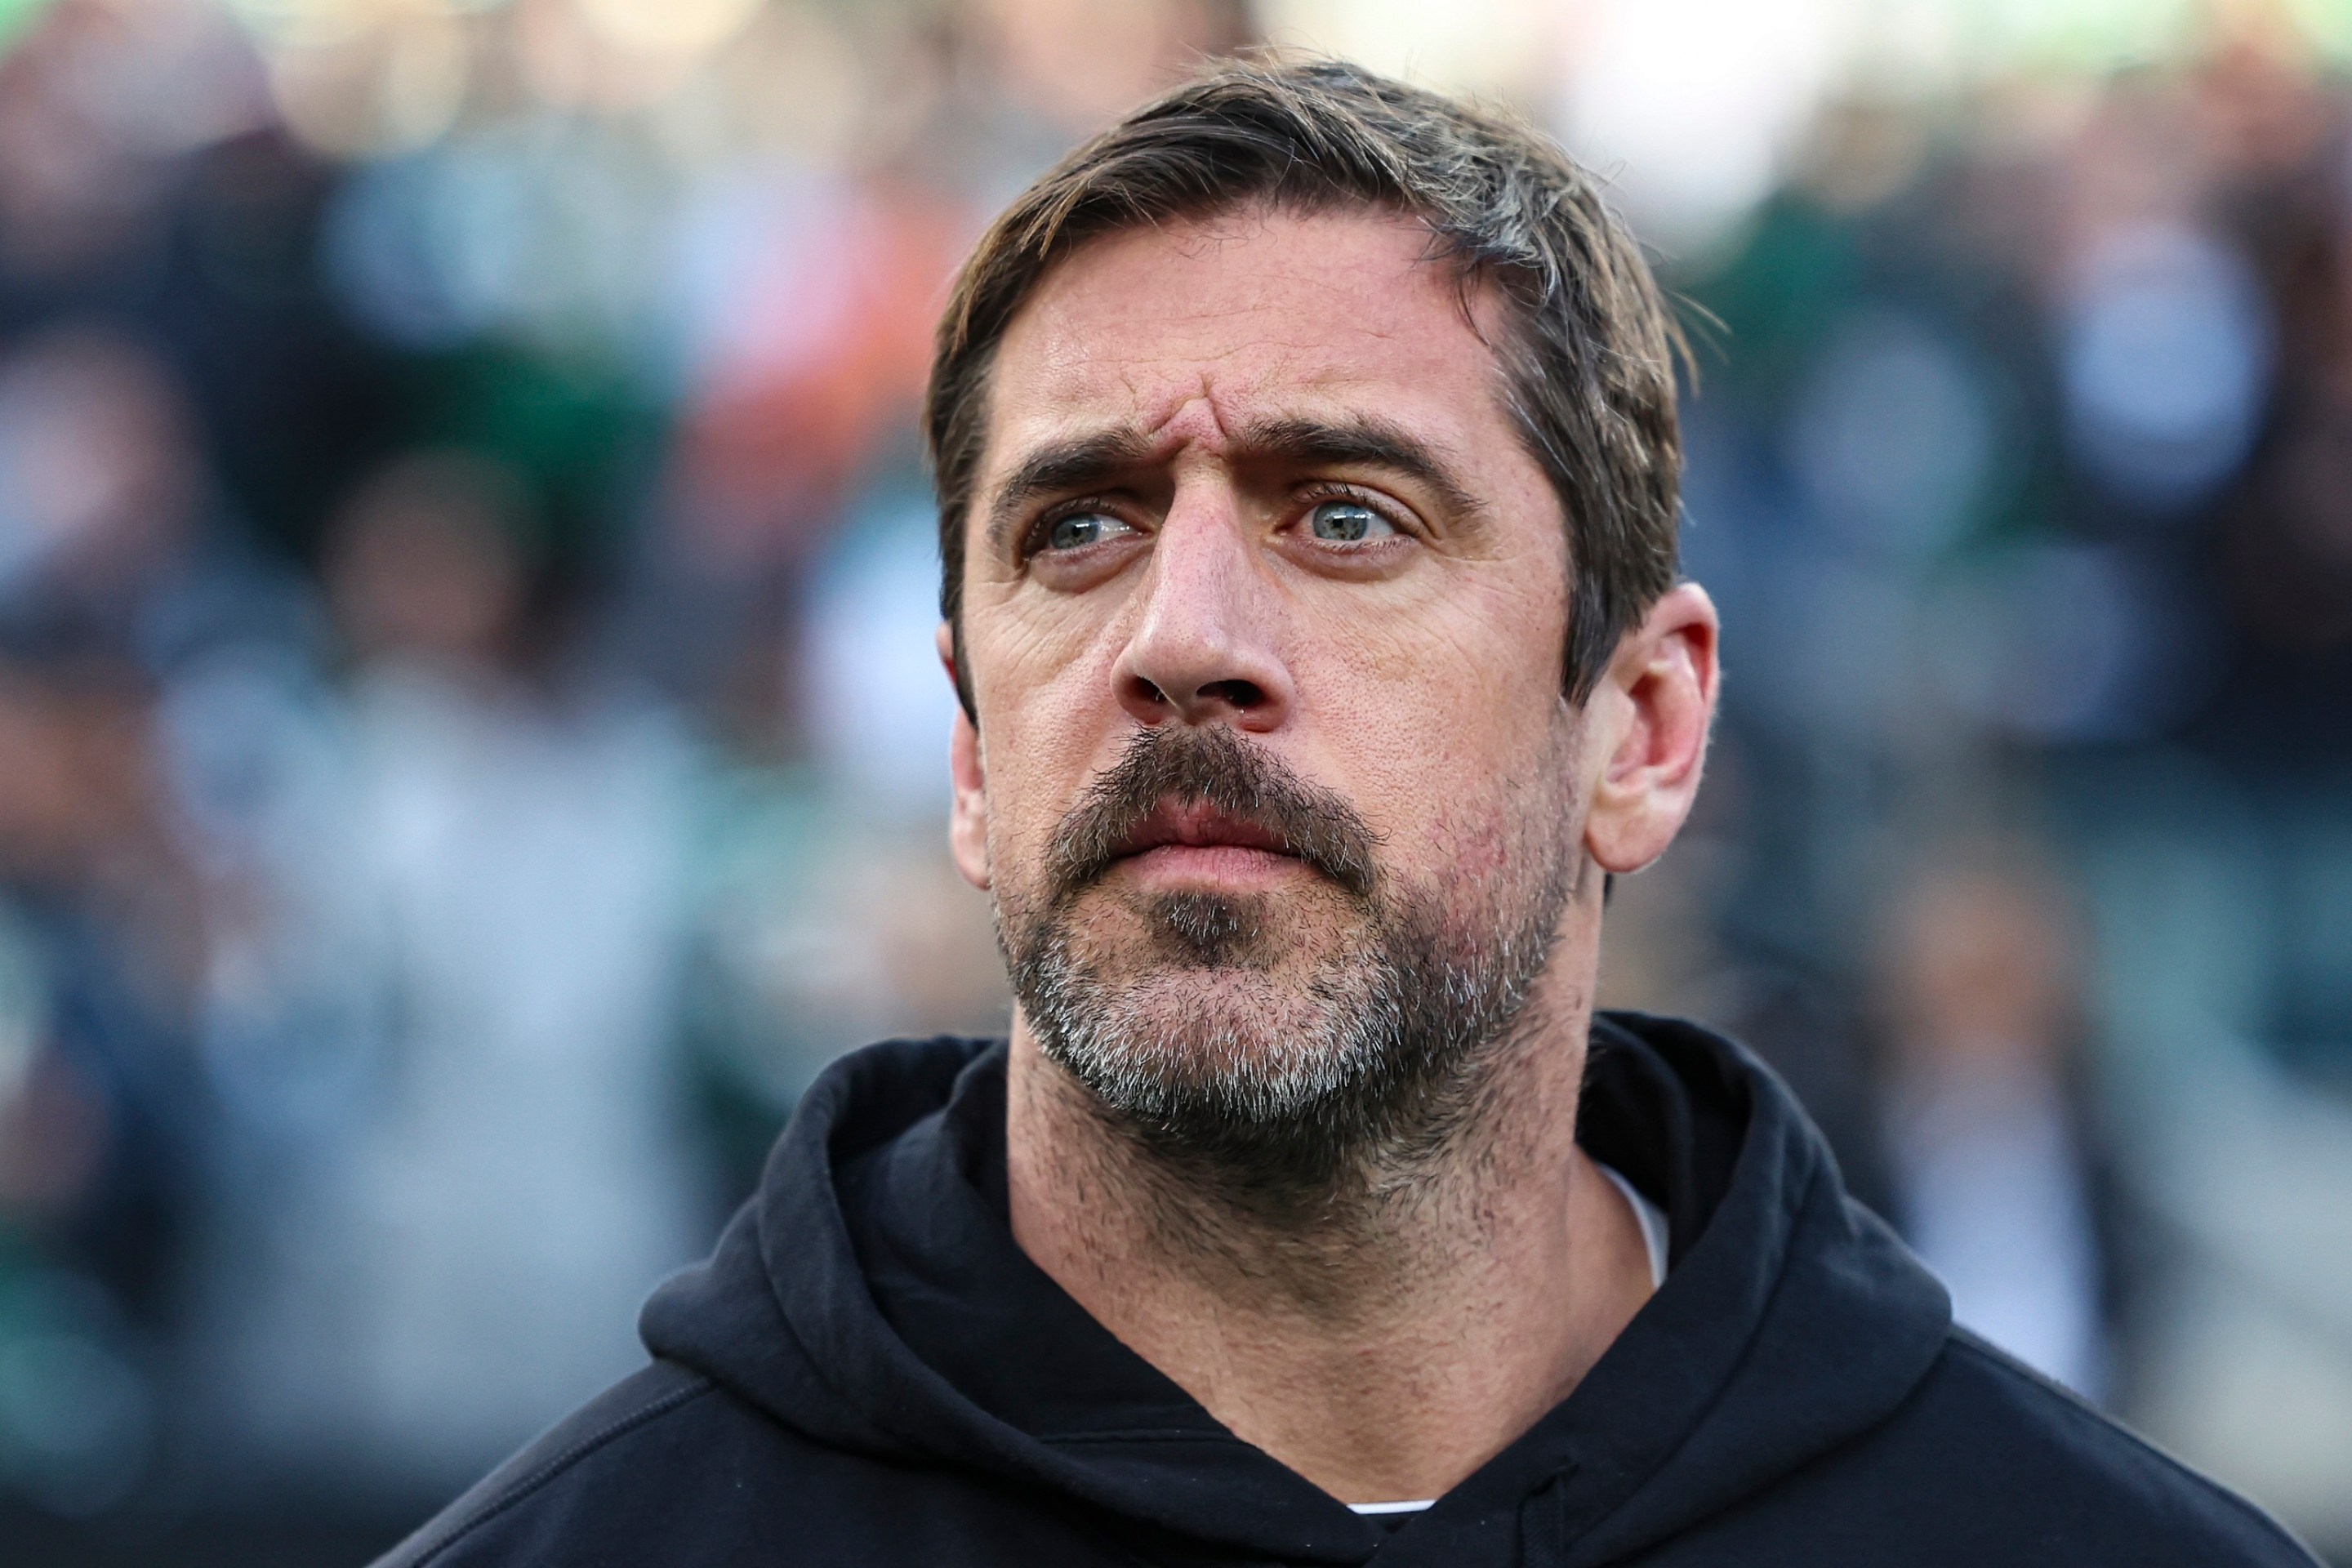 EAST RUTHERFORD, NJ - NOVEMBER 24: Aaron Rodgers #8 of the New York Jets looks on from the sideline during the national anthem prior to an NFL football game against the Miami Dolphins at MetLife Stadium on November 24, 2023 in East Rutherford, New Jersey. (Photo by Perry Knotts/Getty Images)